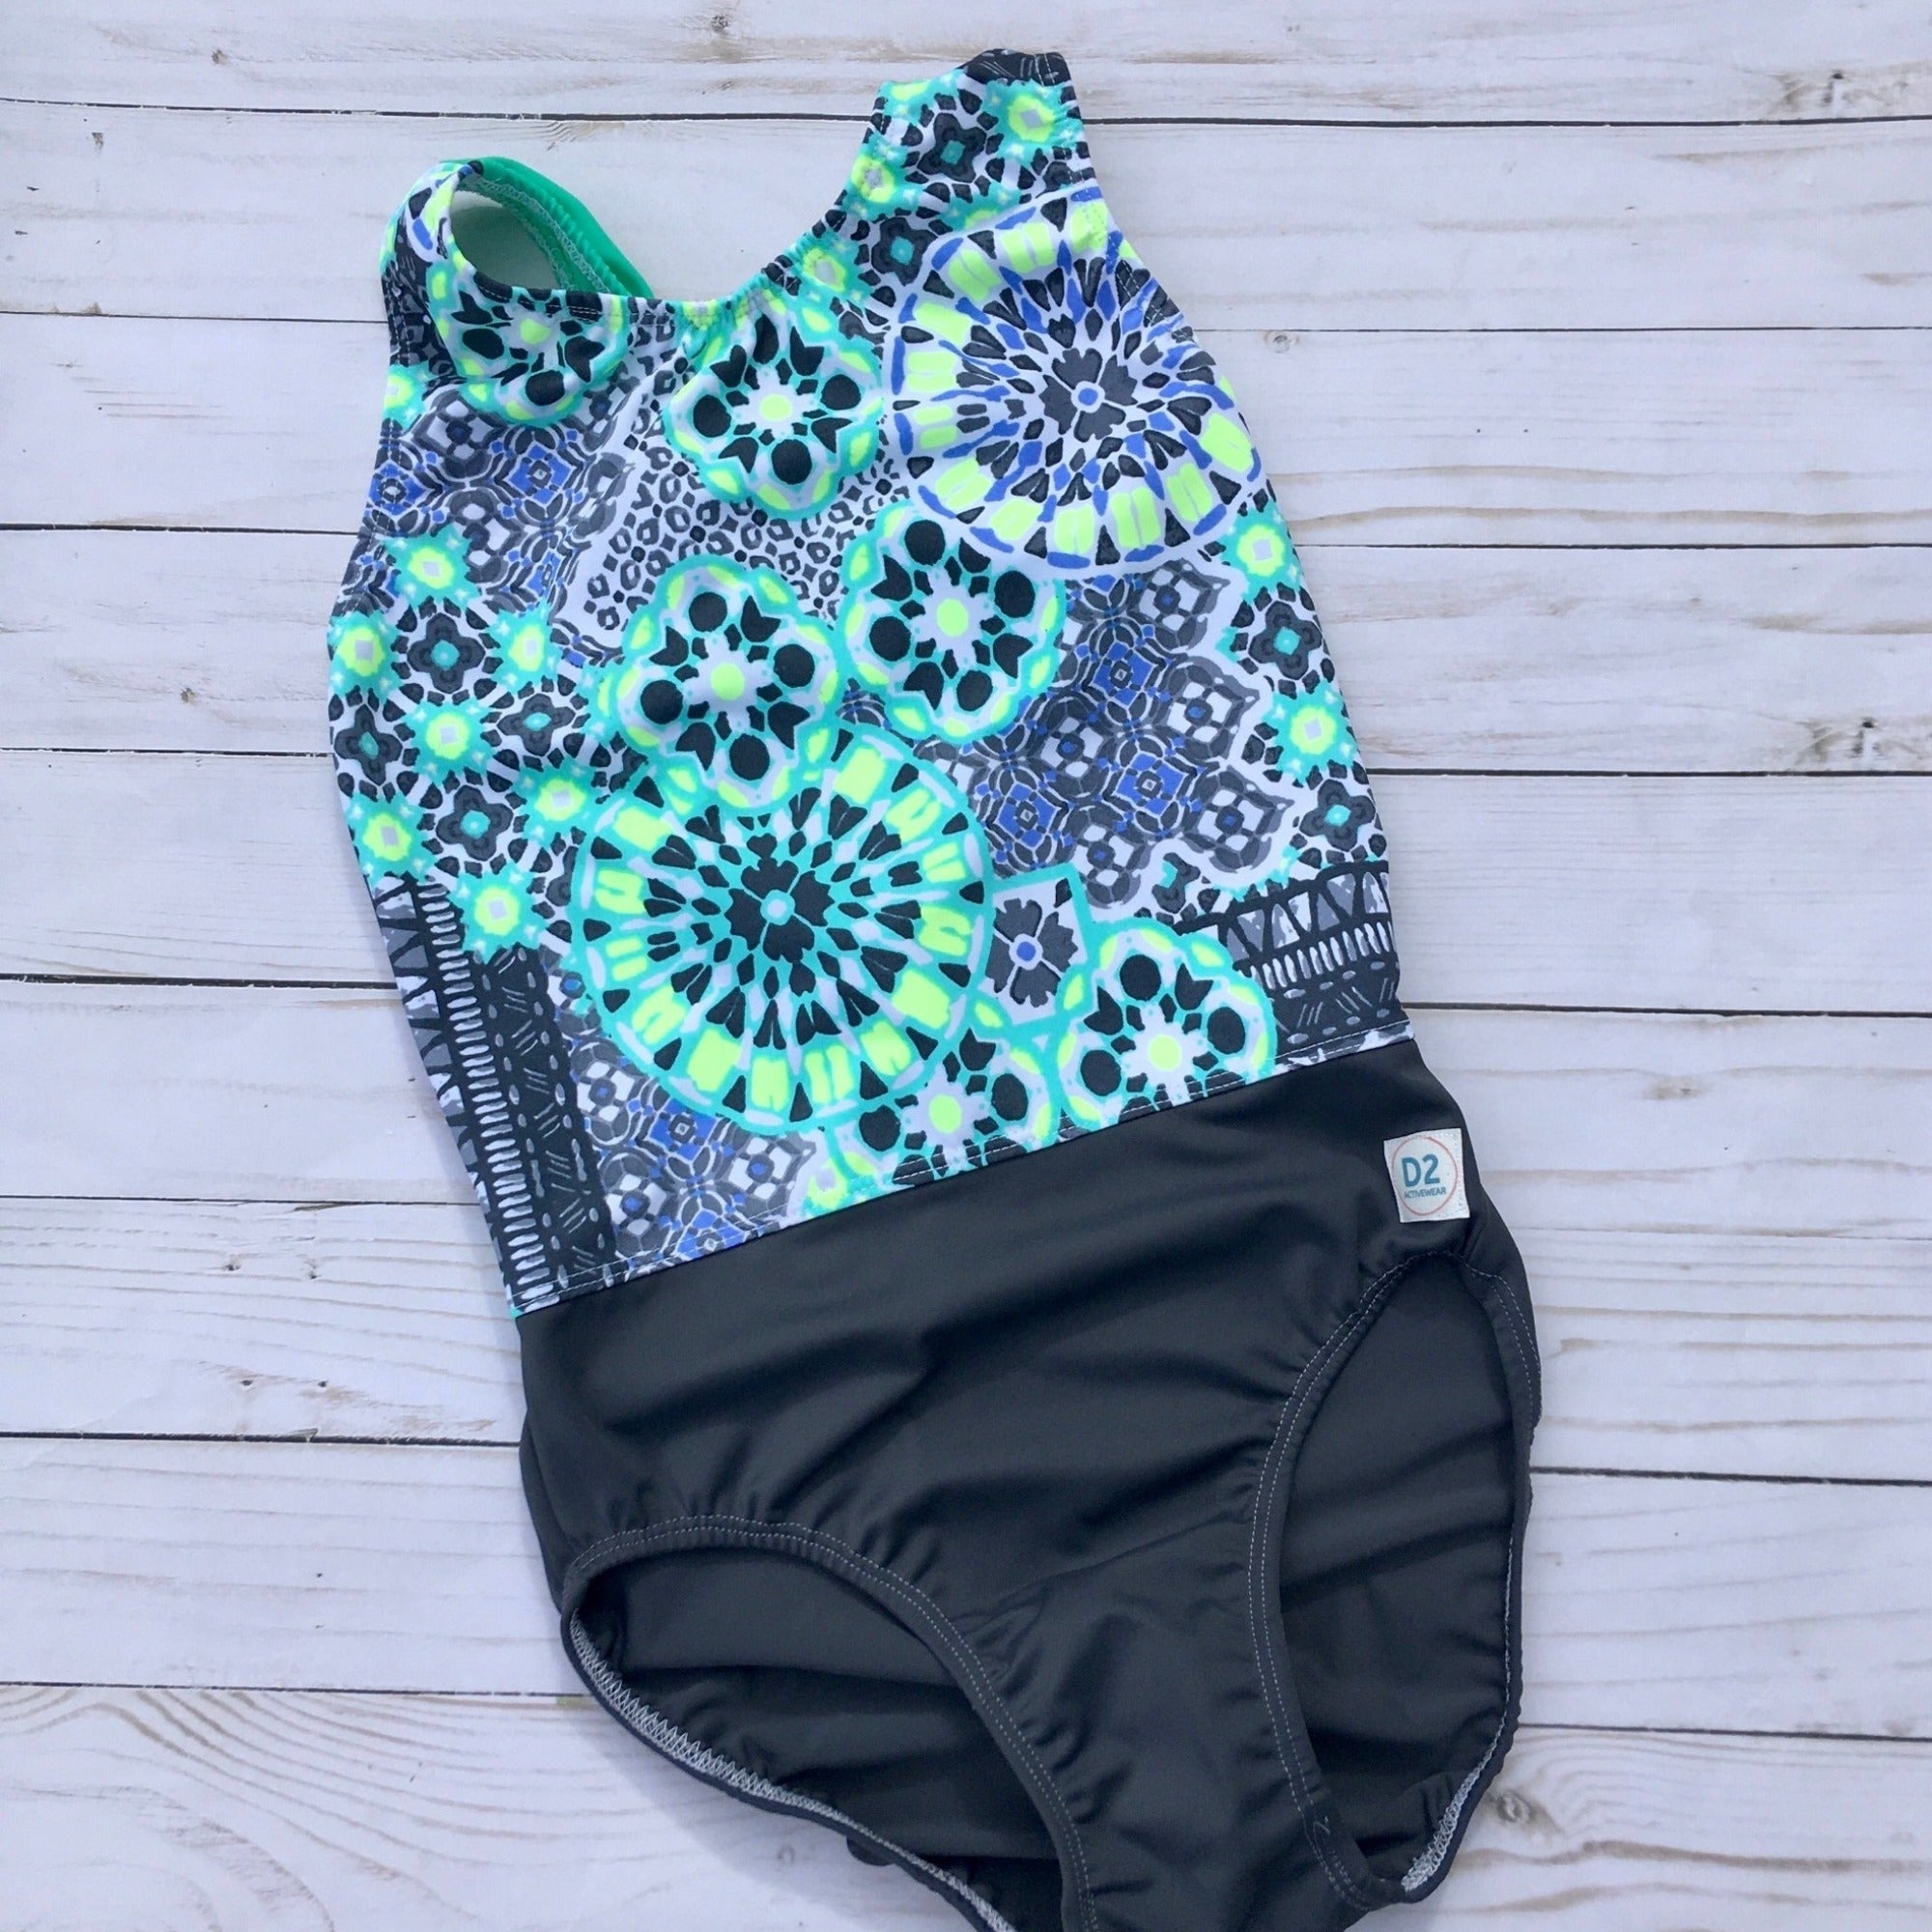 Gymnastics leotard in Pastel Mandala print with soft gray accented bottom.  Seaform green, white, gray, neon yellow and periwinkle colors make up the Mandala print.